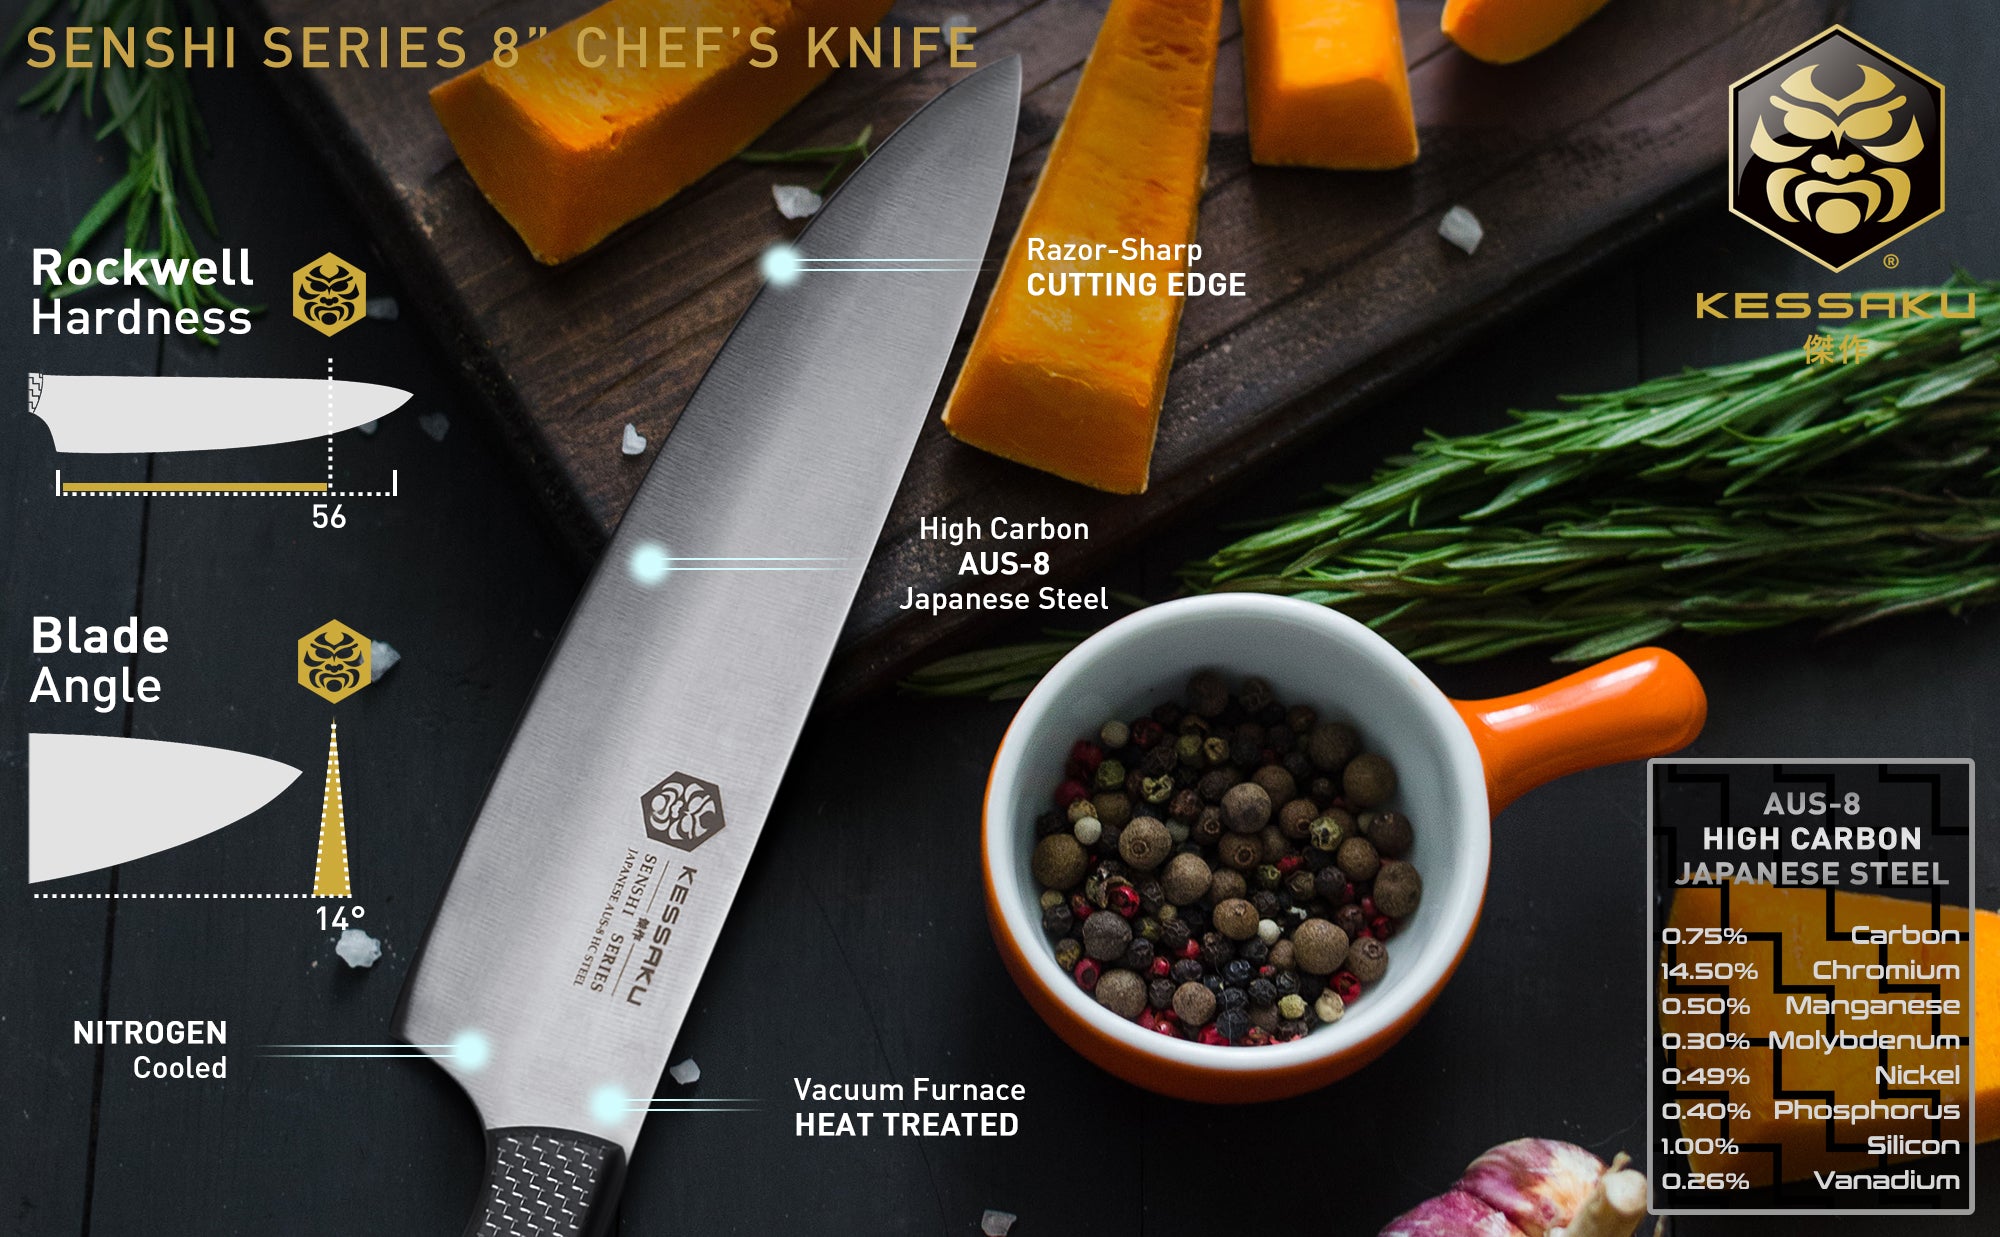 The Kessaku Senshi Series 8-Inch Chef's and 3.5-Inch Paring Knives features, dimensions, and steel composition